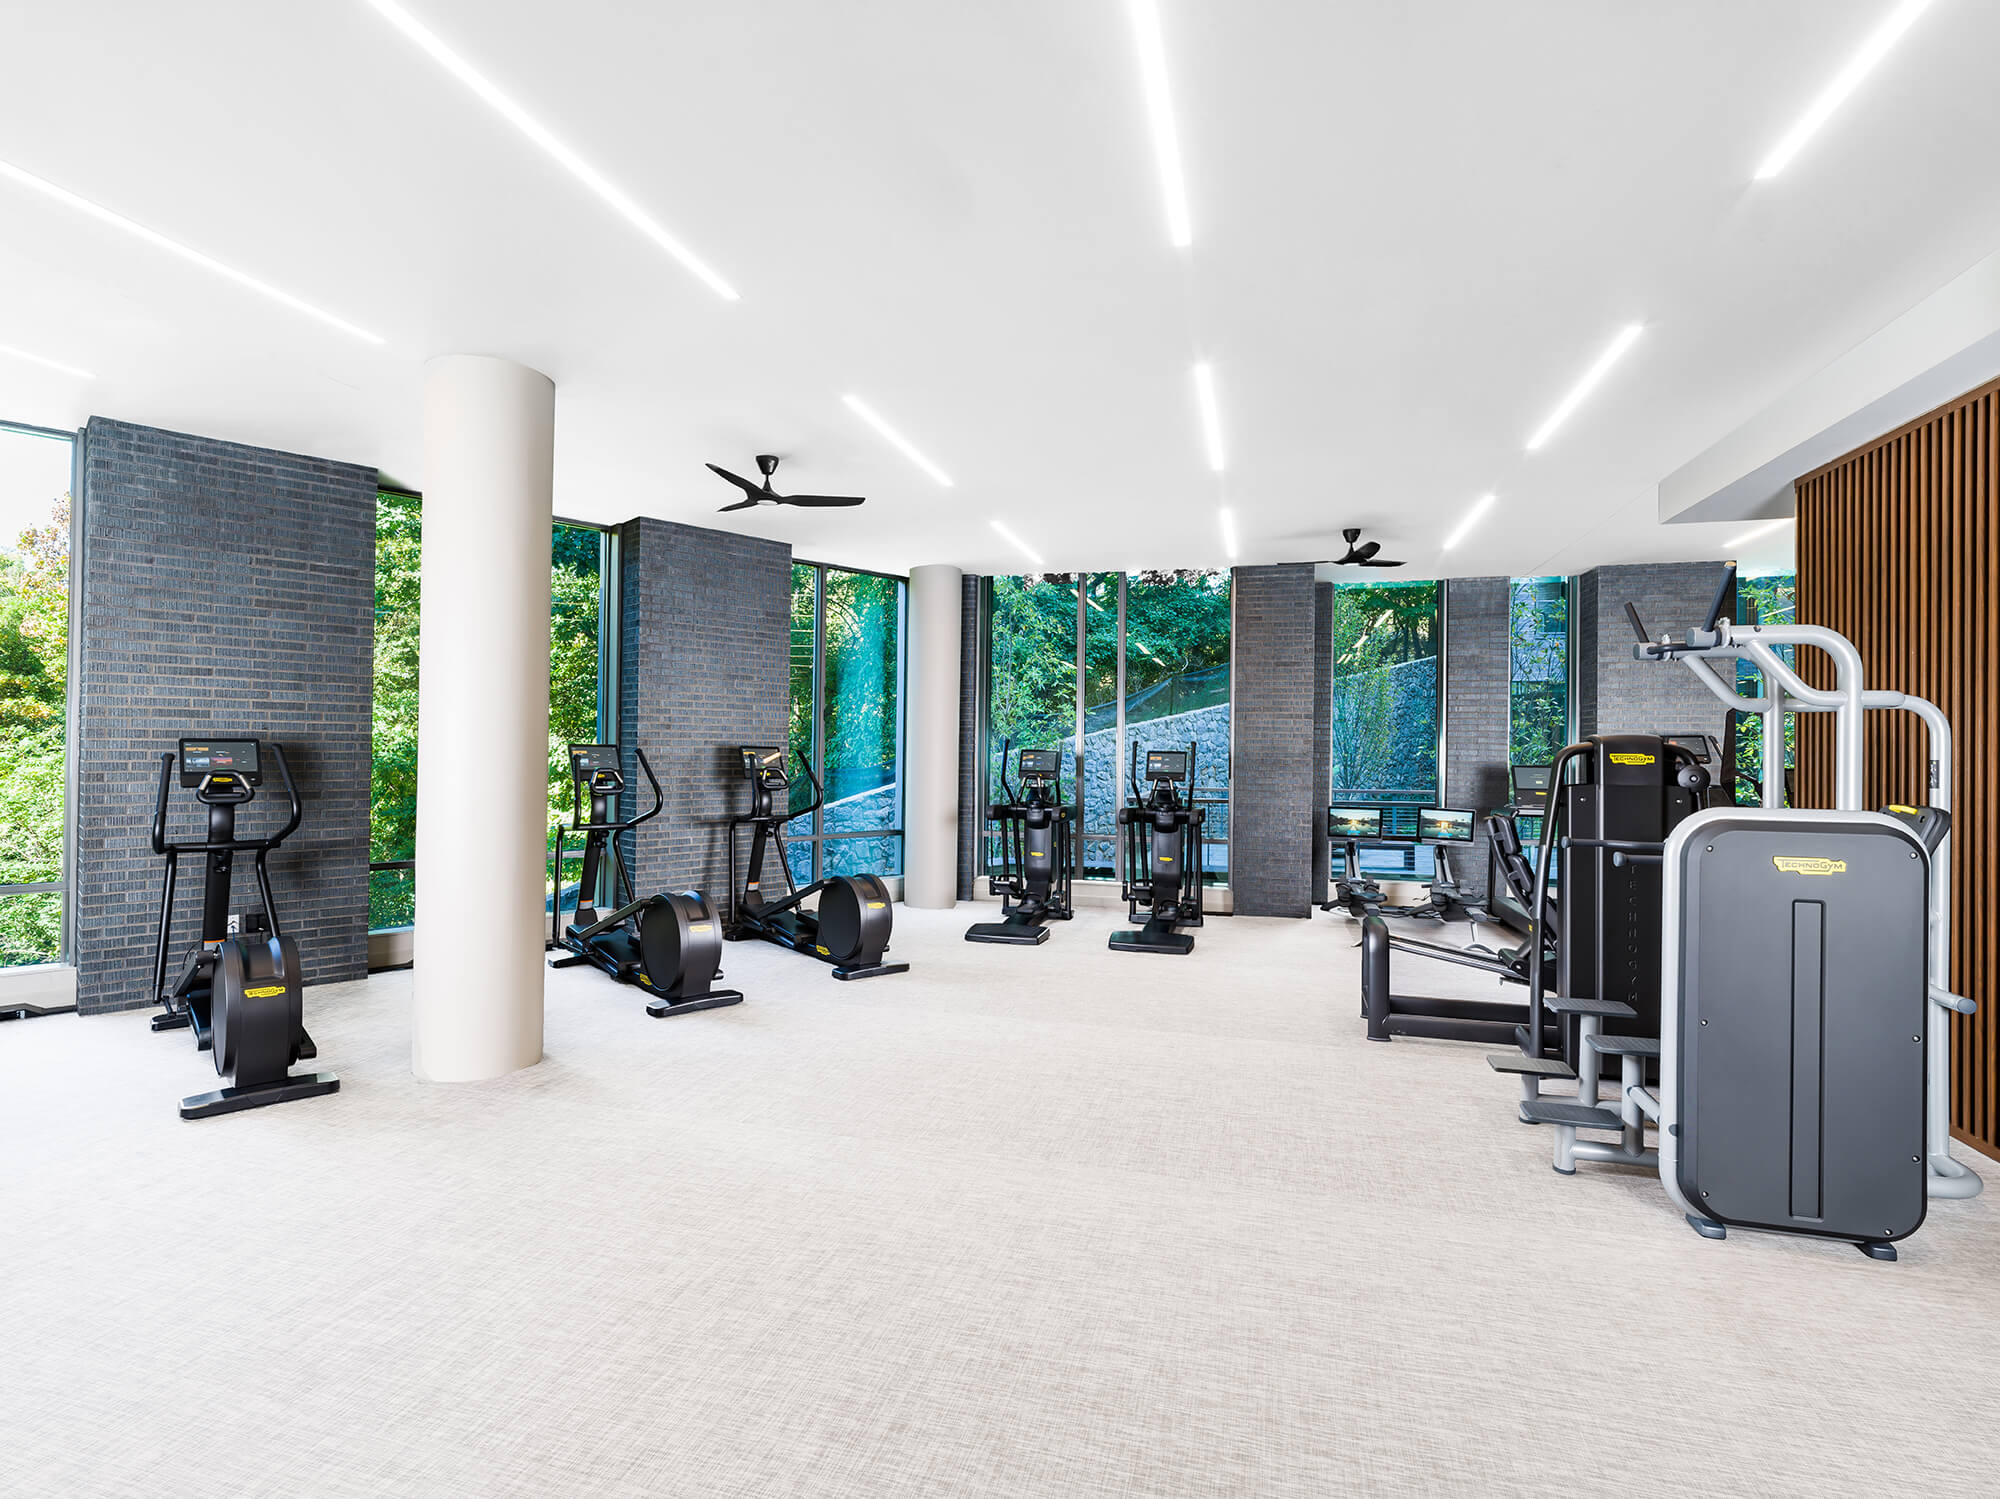 24-hour, state-of-the-art Fitness Studio facilities